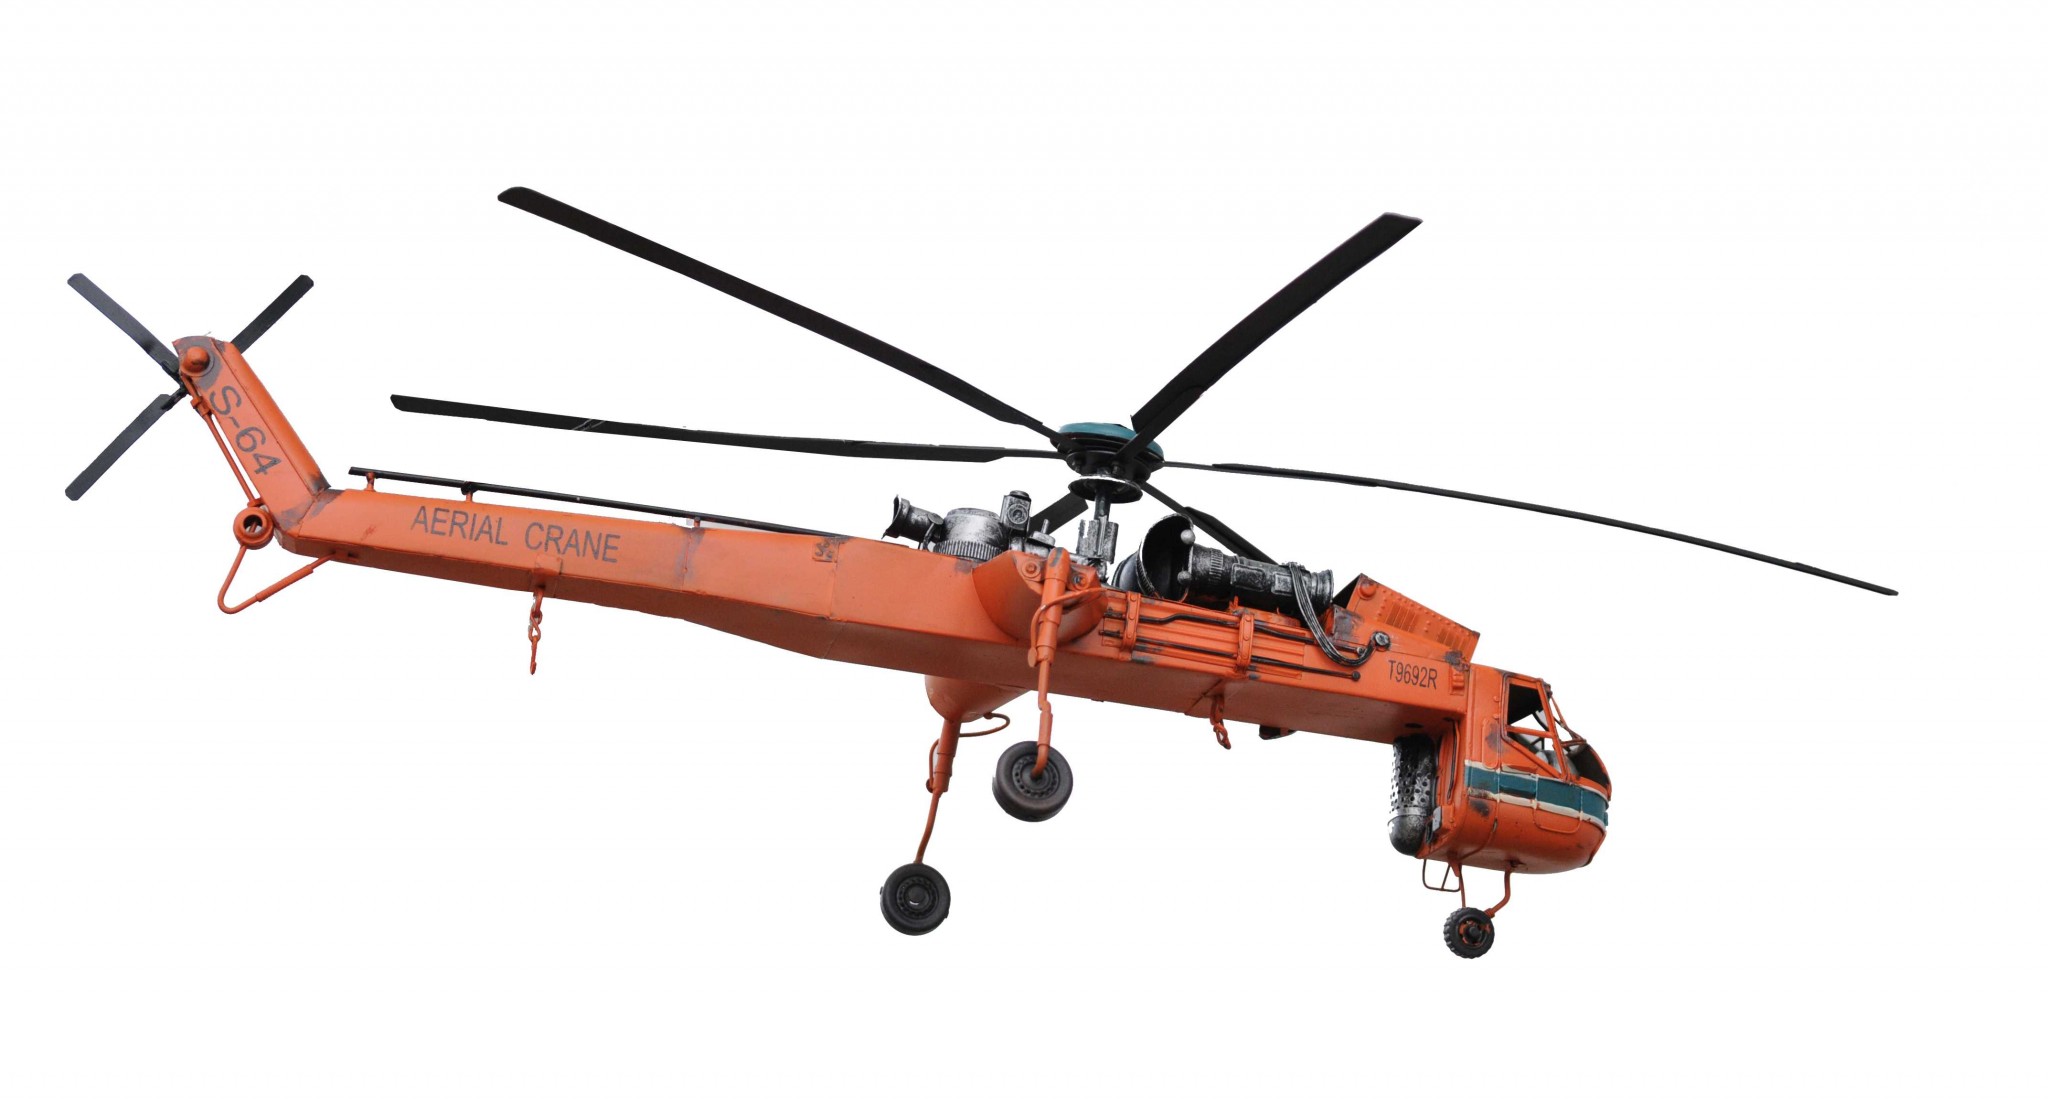 30" x 40" x 12" Aerial Crane Lifting Helicopter